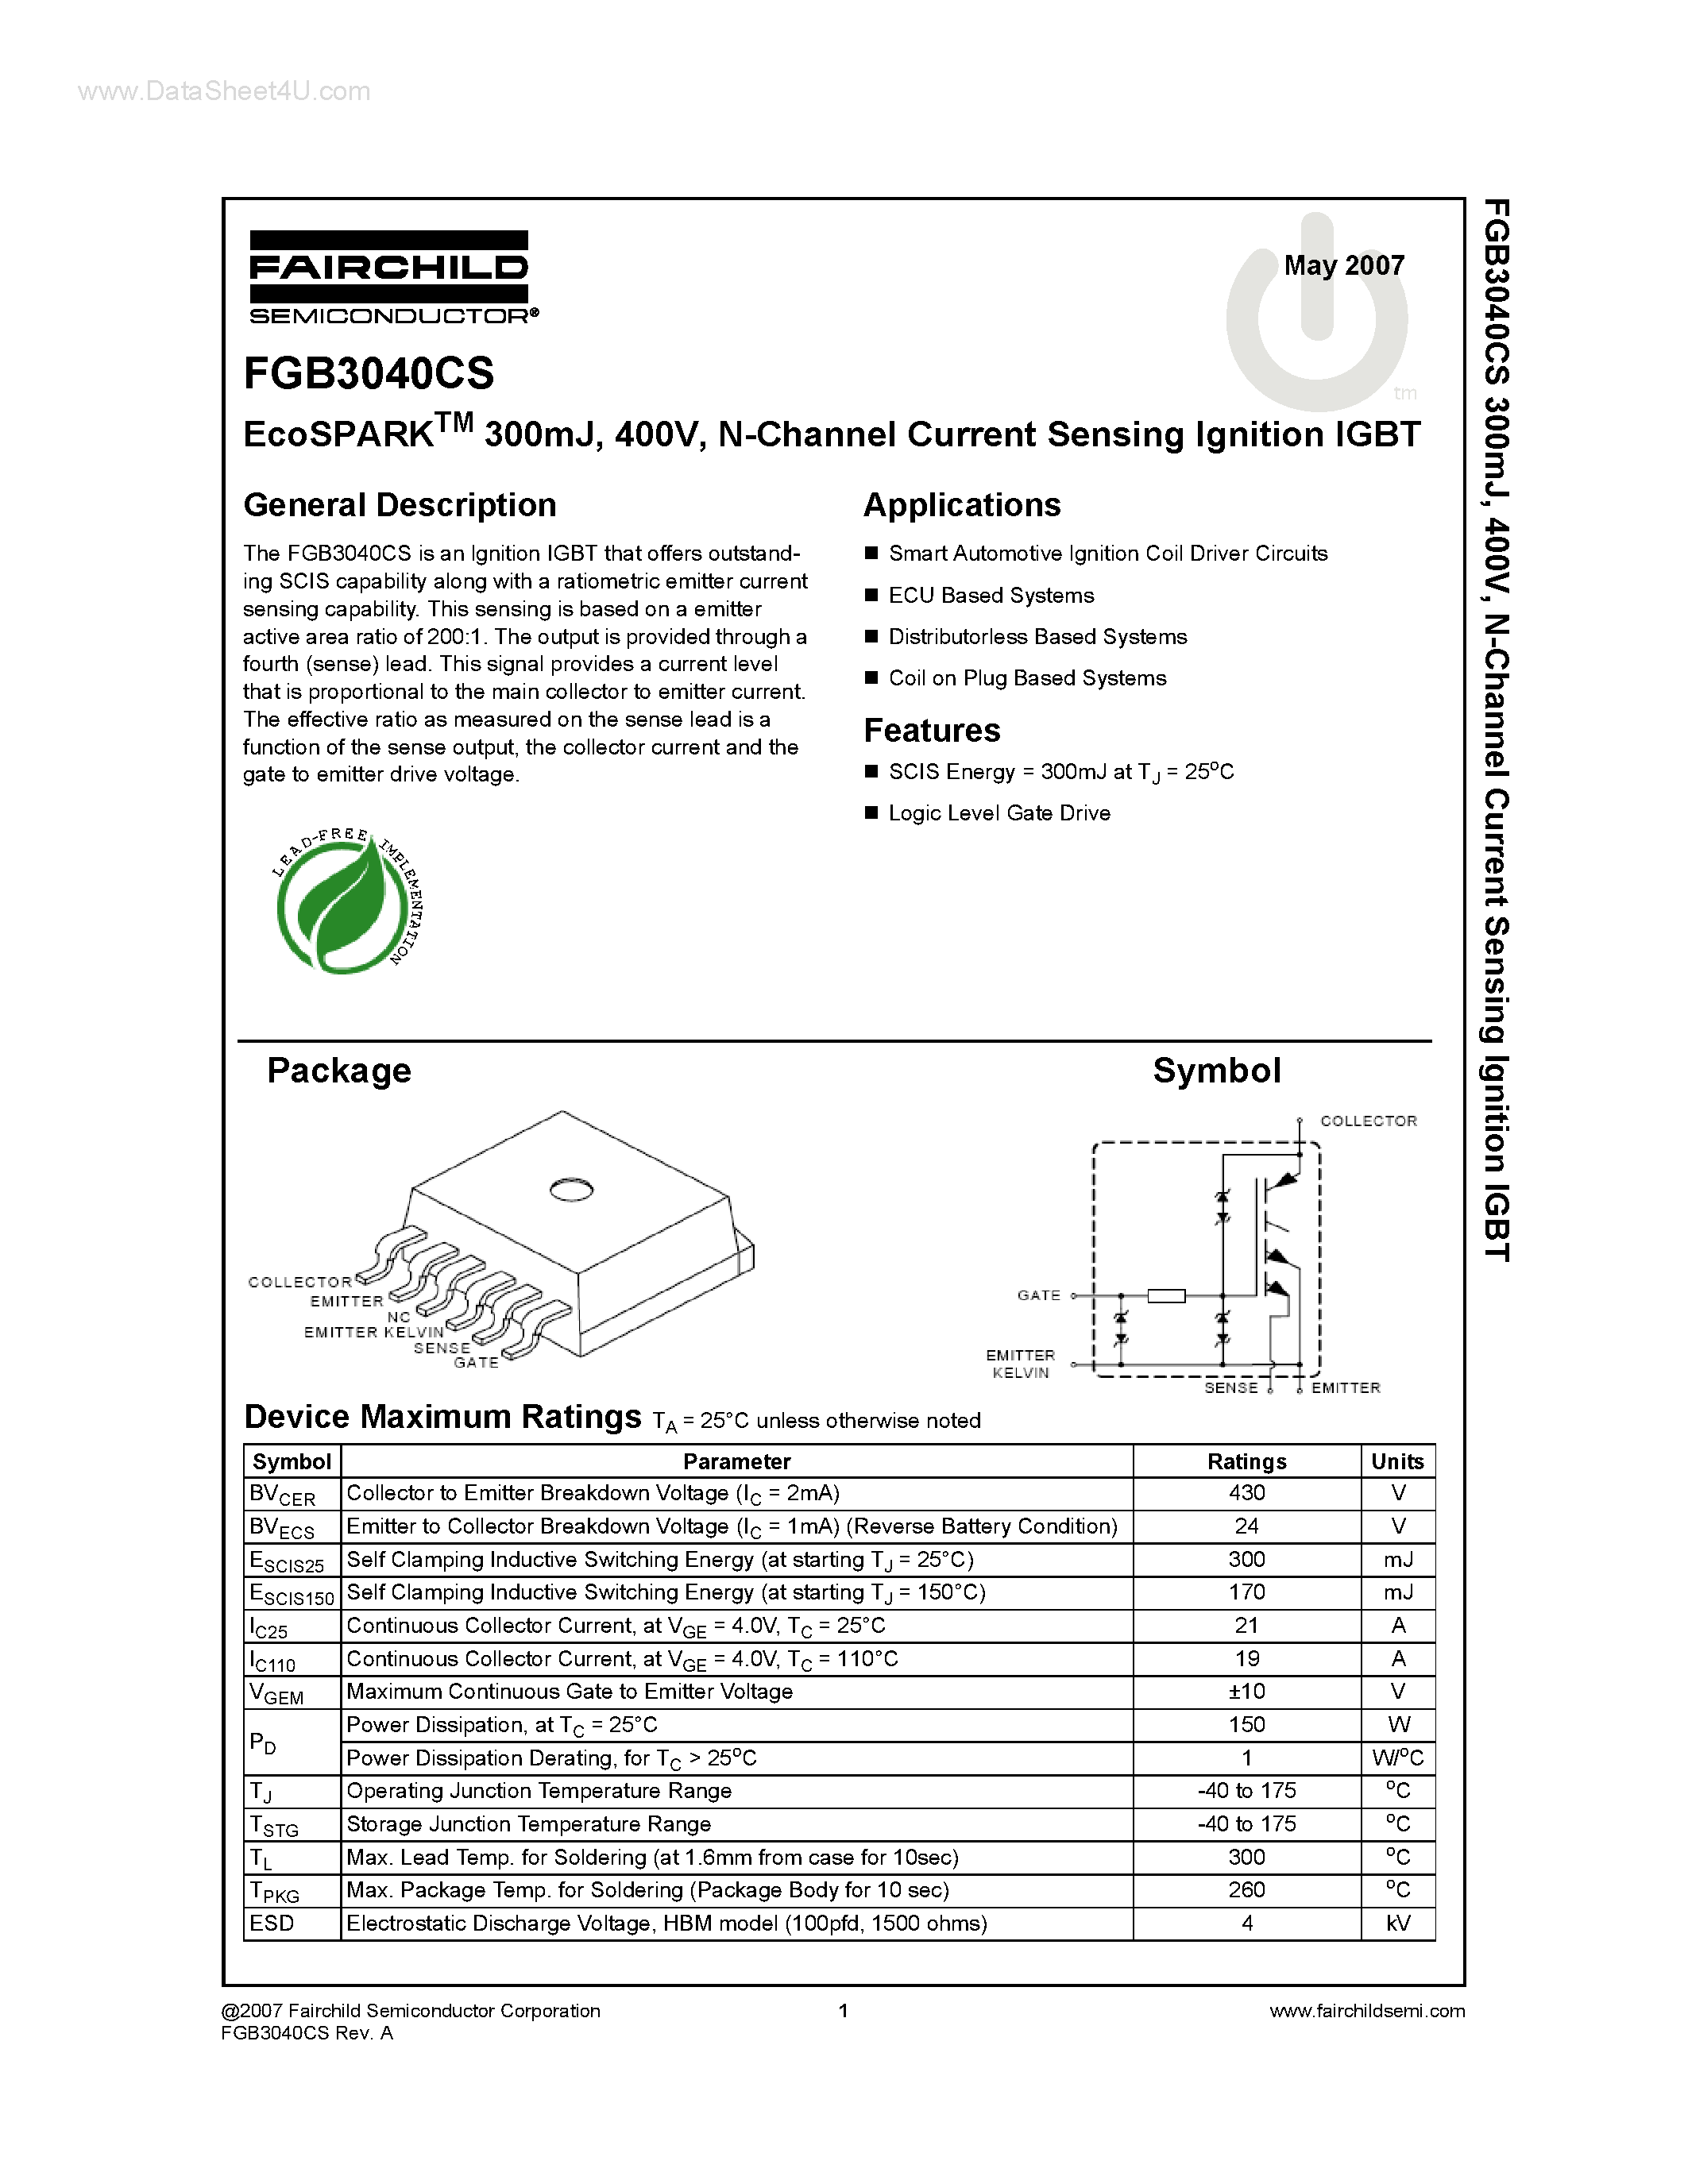 Datasheet FGB3040CS - N-Channel Current Sensing Ignition IGBT page 1